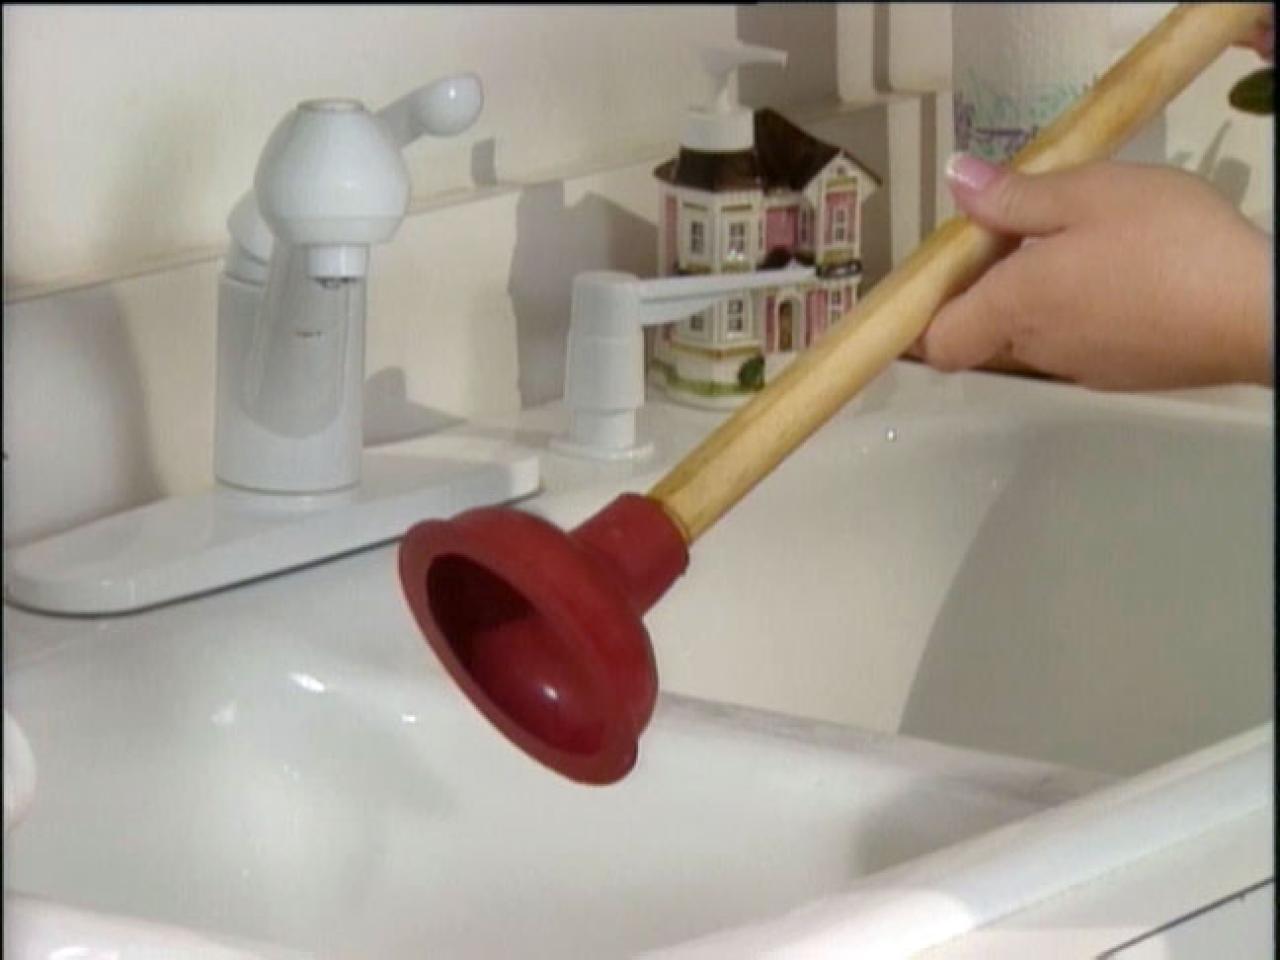 How To Unclog A Sink Drain Tos Diy, How To Unclog A Bathtub Drain With Standing Water Plunger